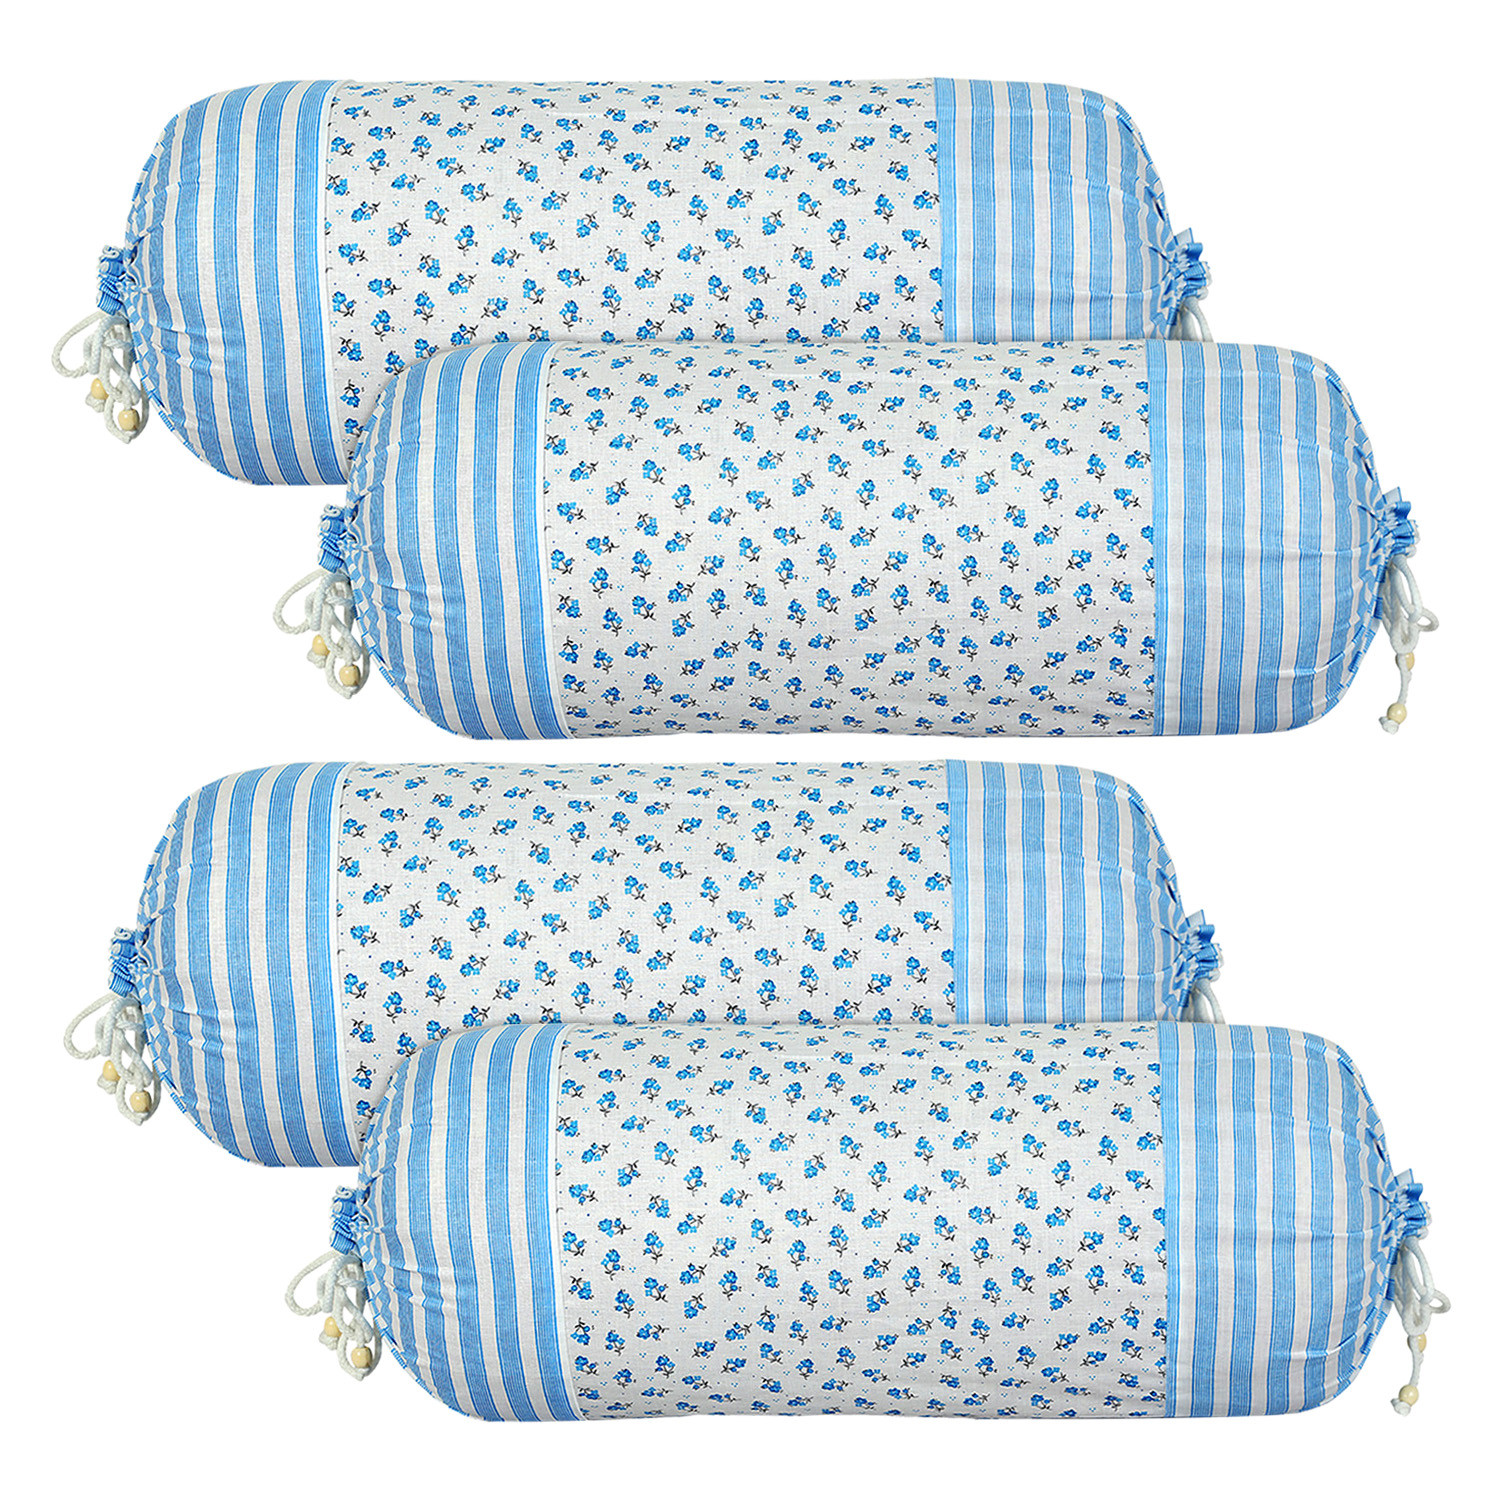 Kuber Industries Bolster Covers | Cotton Bolster Cover Set | Diwan Bolster Cover Set | Bolster Pillow Cover | Blue Flower Masand Cover | 16x32 Inch |White